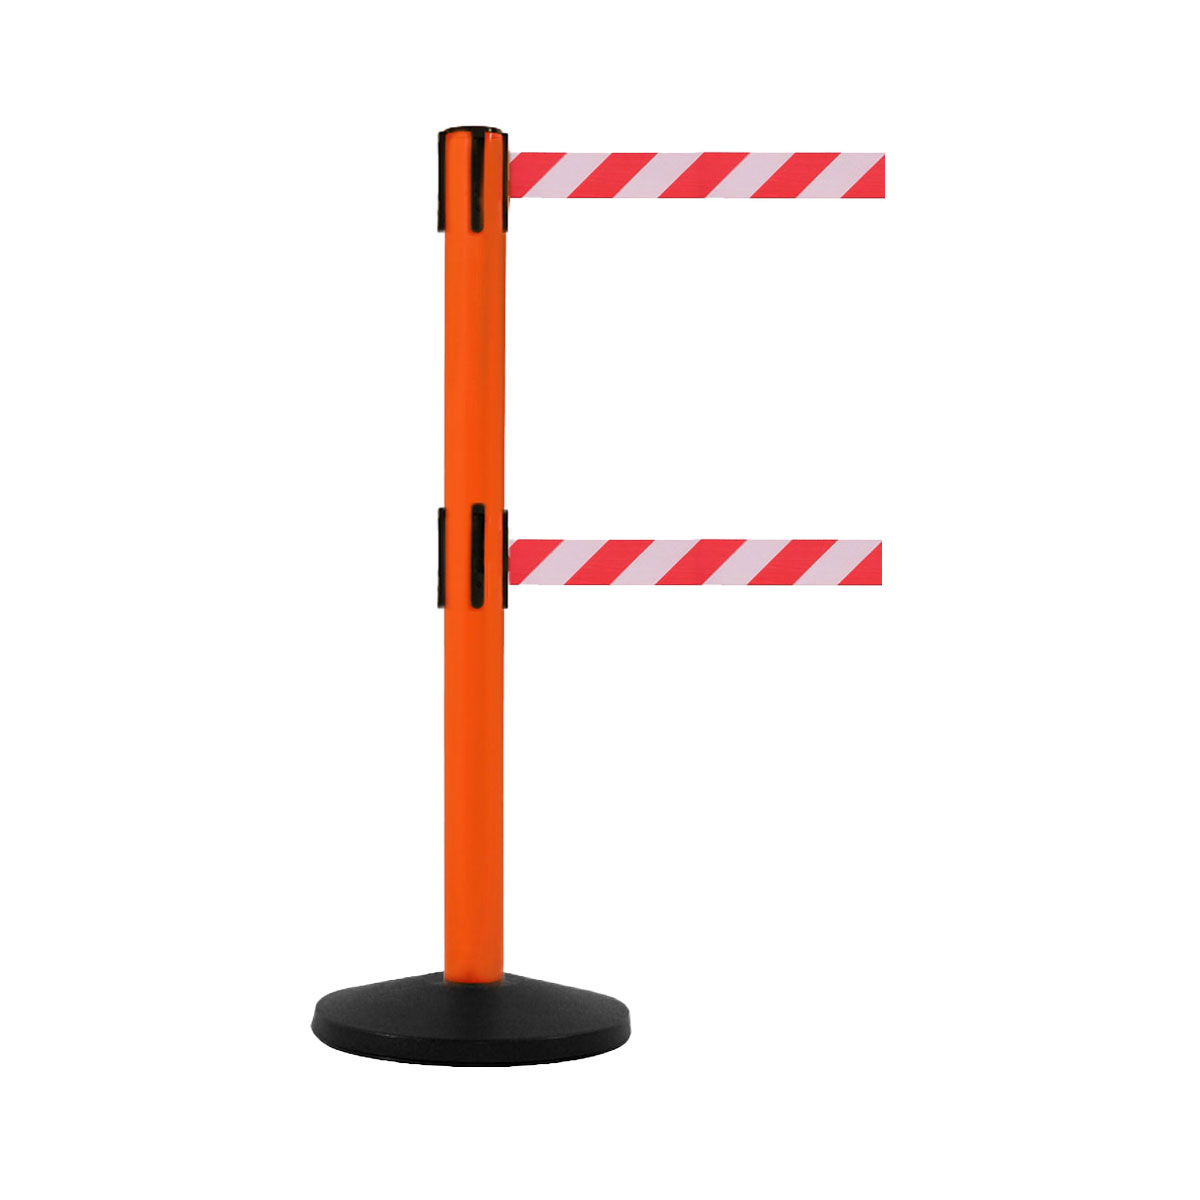 SafetyMaster Twin Belt Safety Barriers - High Visibility Safety Barriers